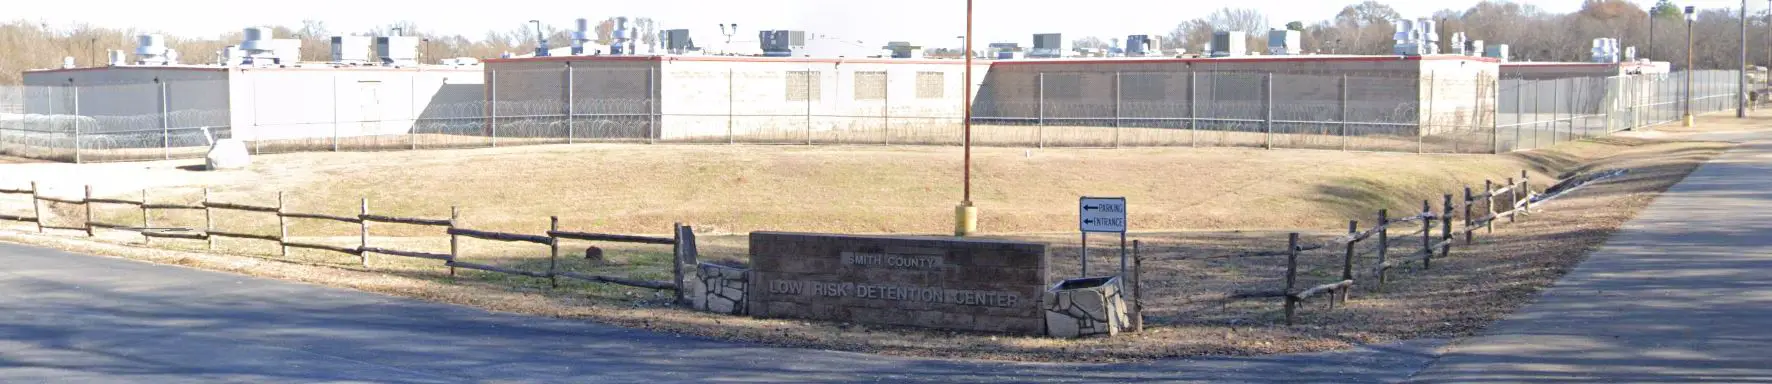 Photos Smith County Low Risk Detention Center 1